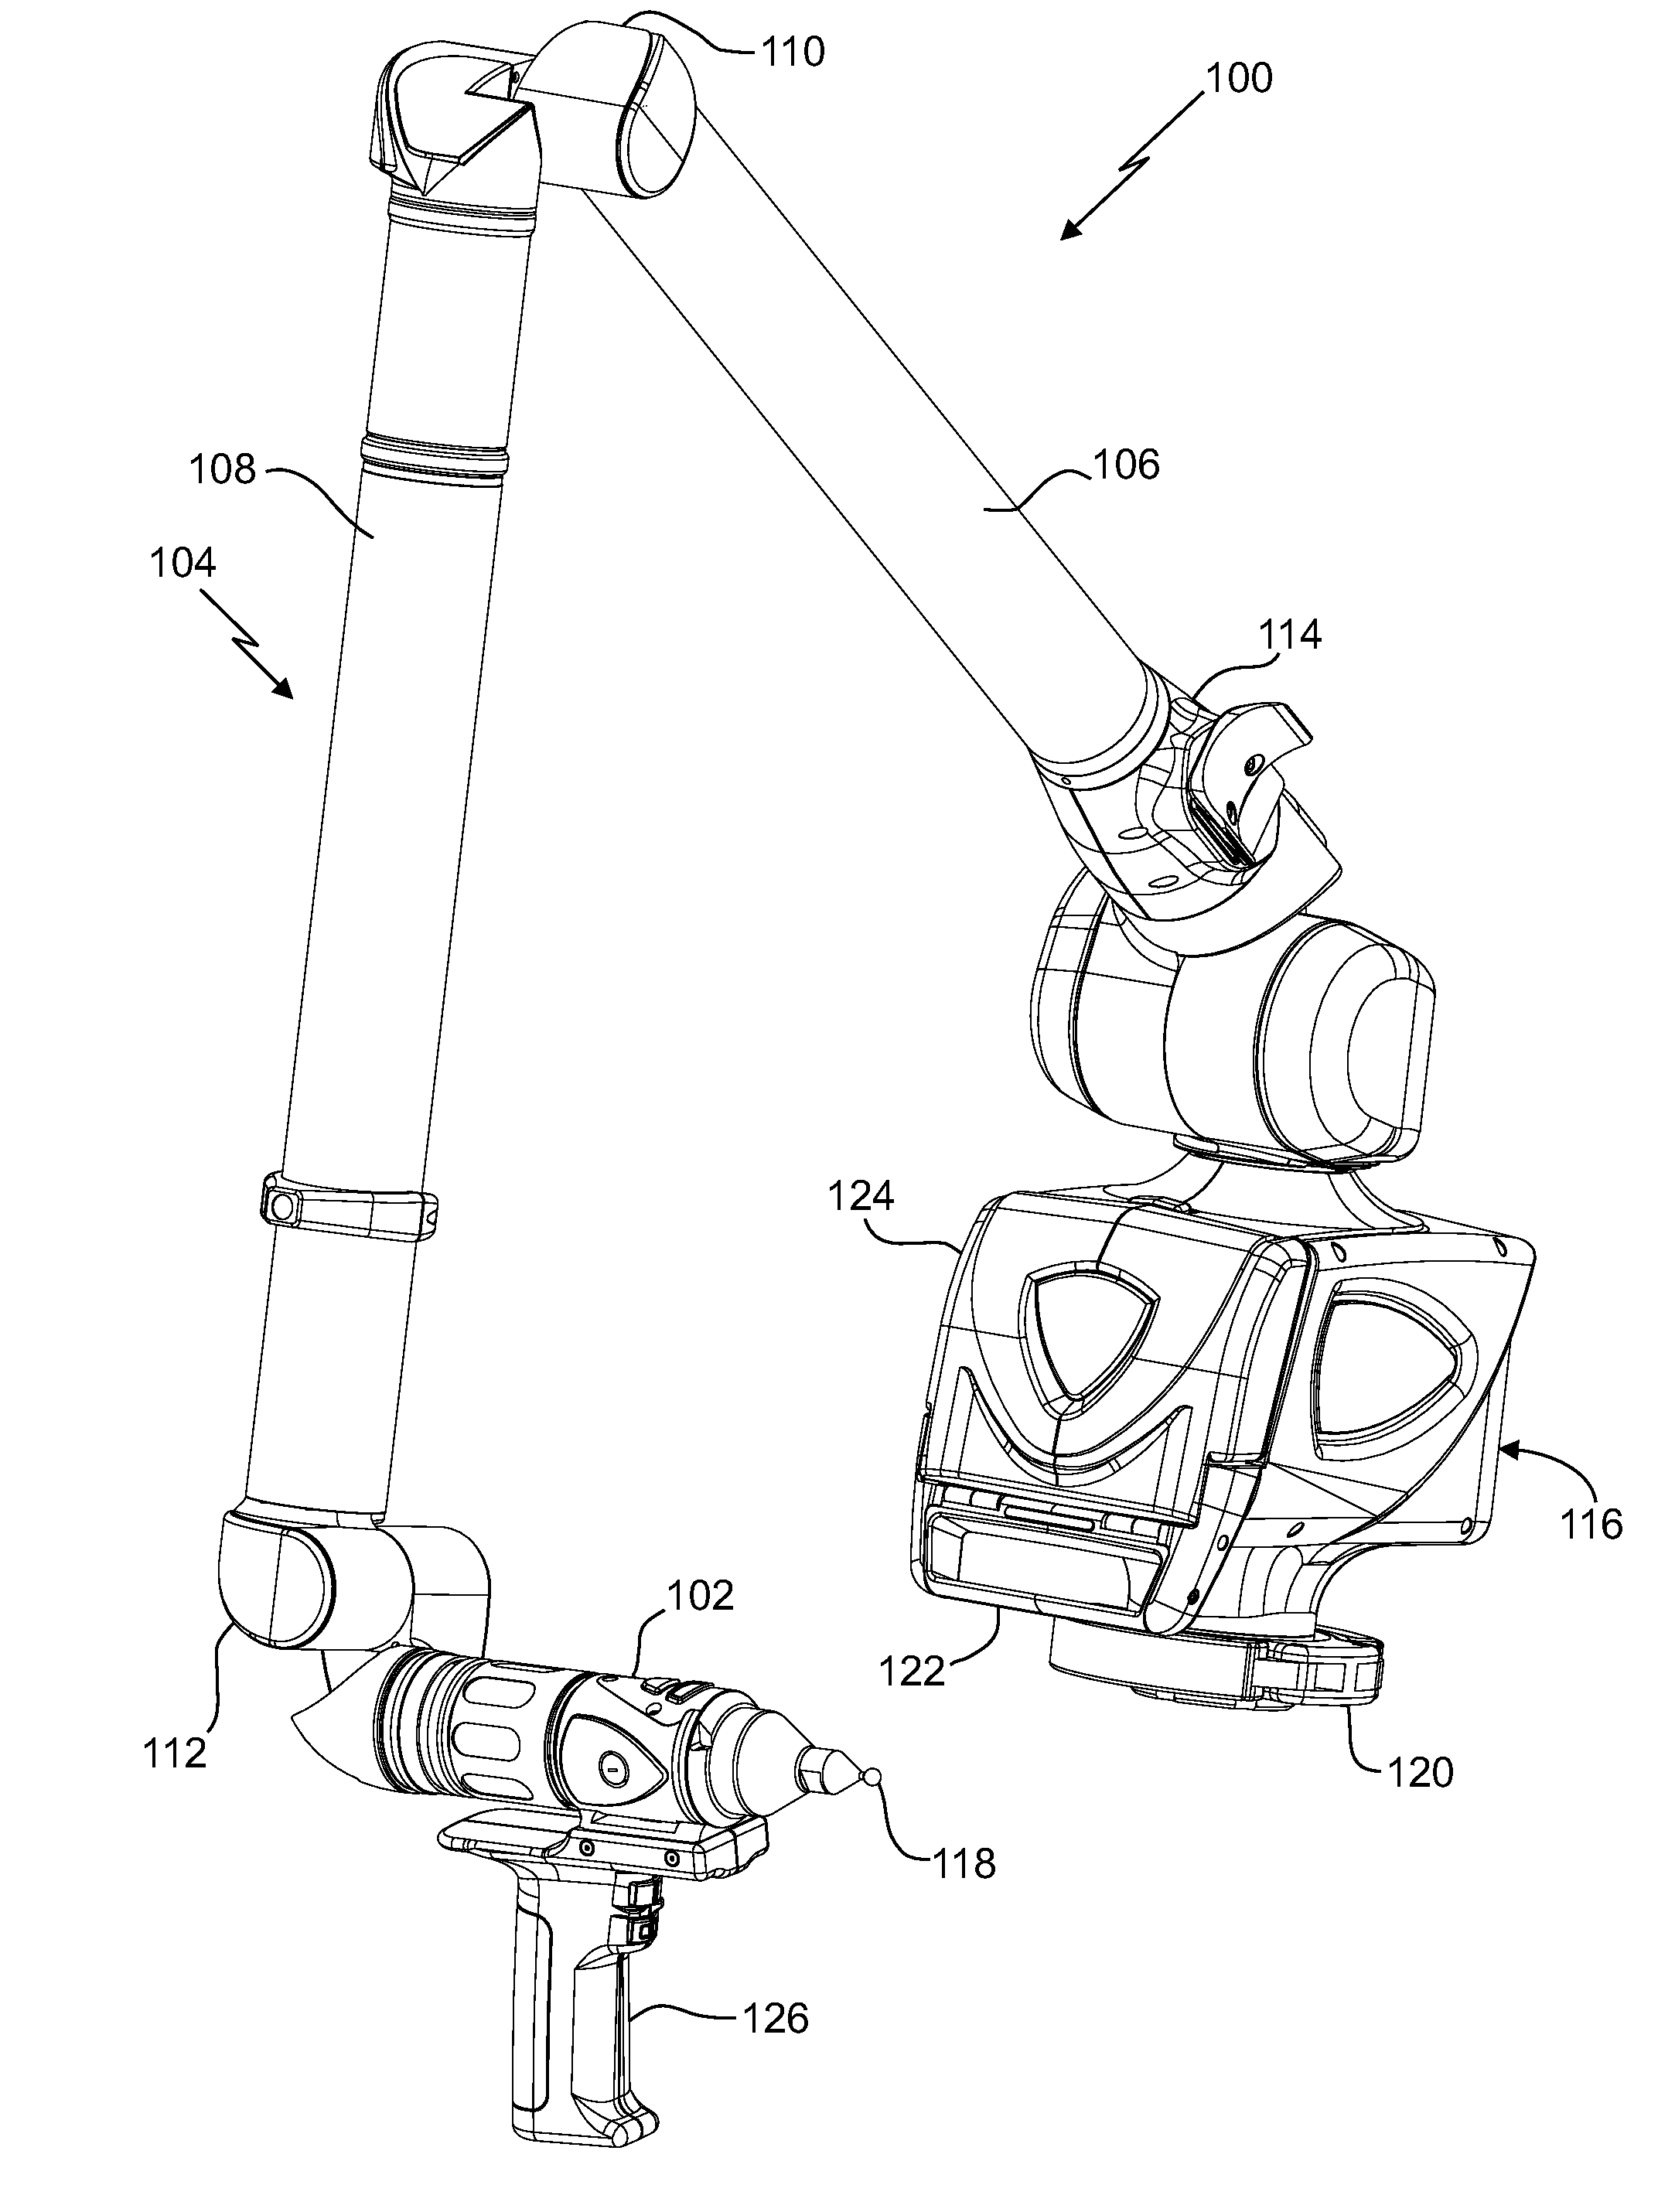 Use of inclinometers to improve relocation of a portable articulated arm coordinate measuring machine